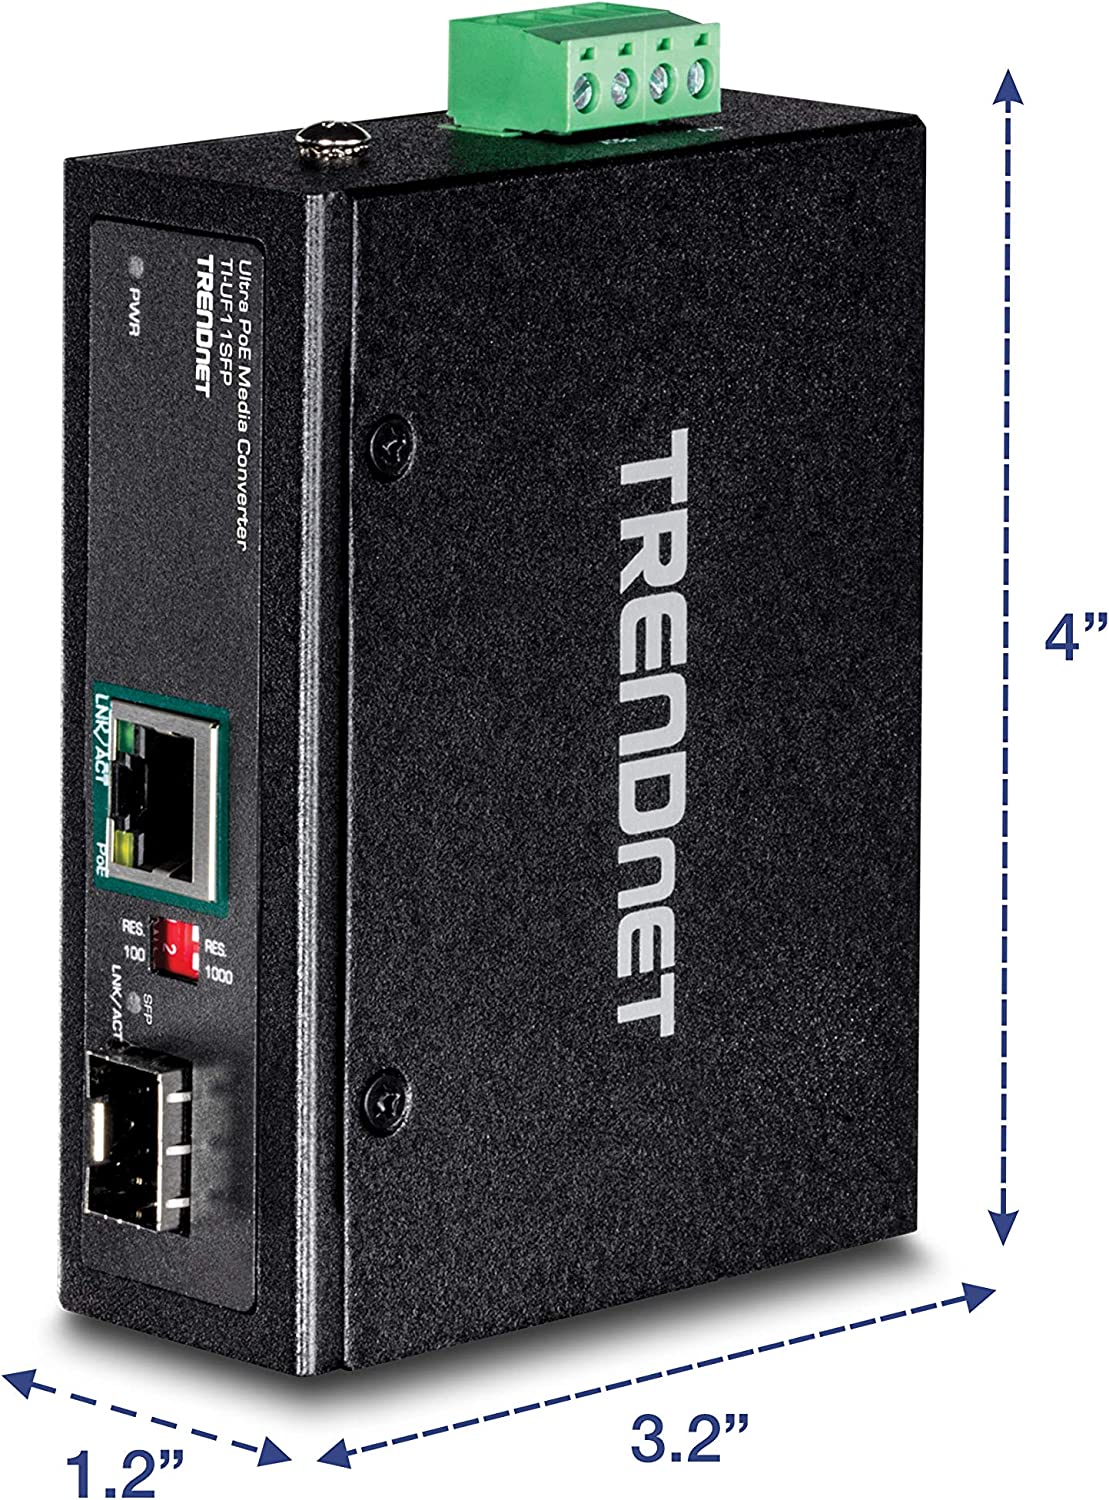 TRENDnet Hardened Industrial SFP to Gigabit UPoE Media Converter, IP30 Rated Housing, Includes DIN-Rail &amp; Wall Mounts, Operating Temp. -40 to 75 °C (-40 to 167 °F), TI-UF11SFP, Black